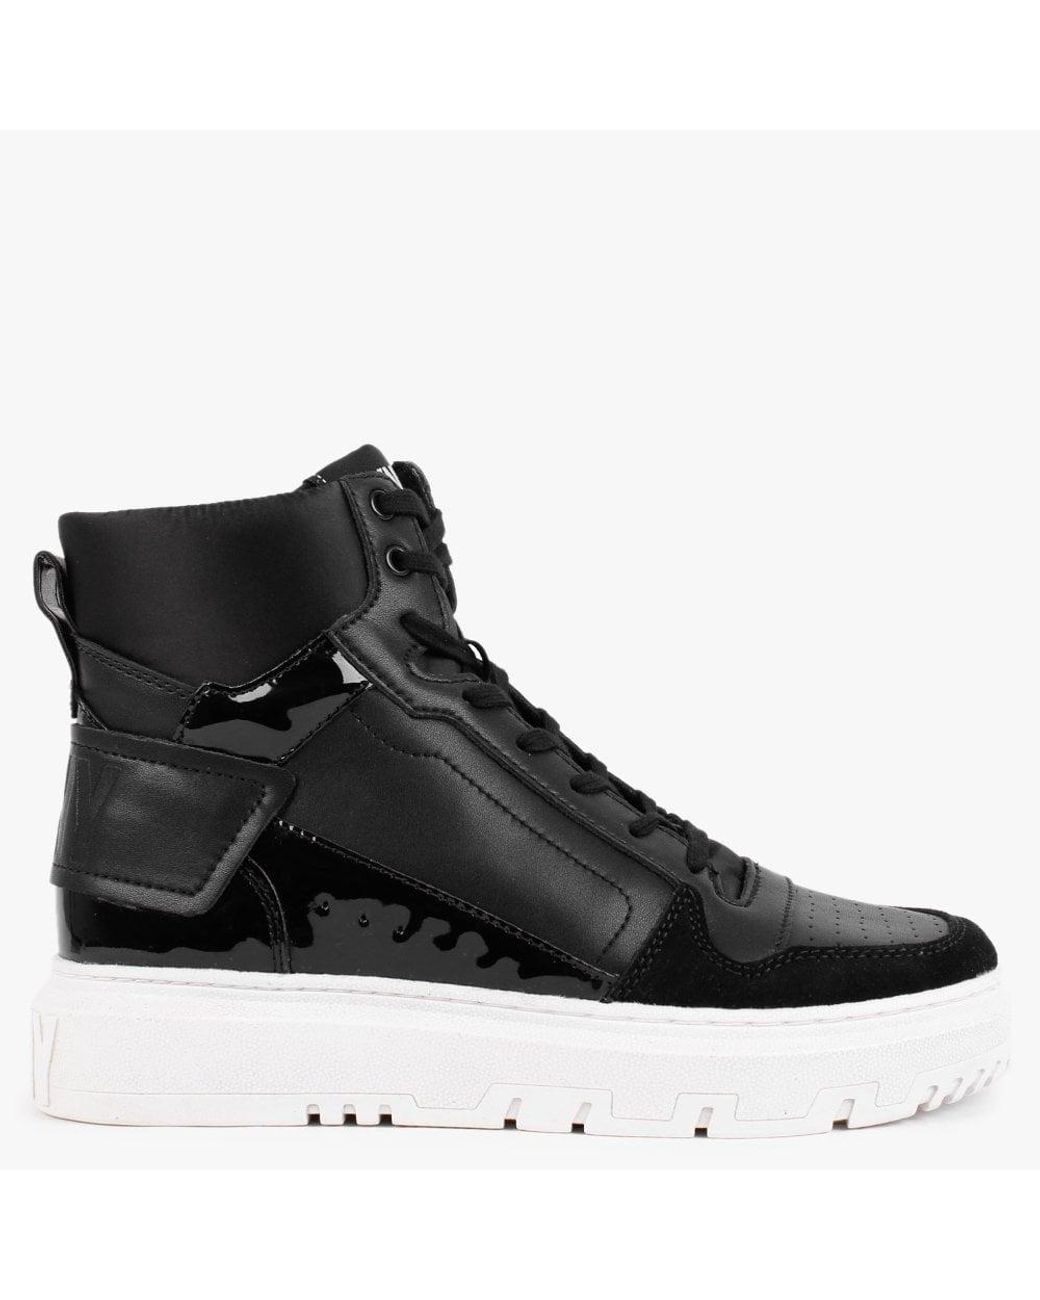 DKNY Mayzi Black Leather High Top Trainers | Lyst UK